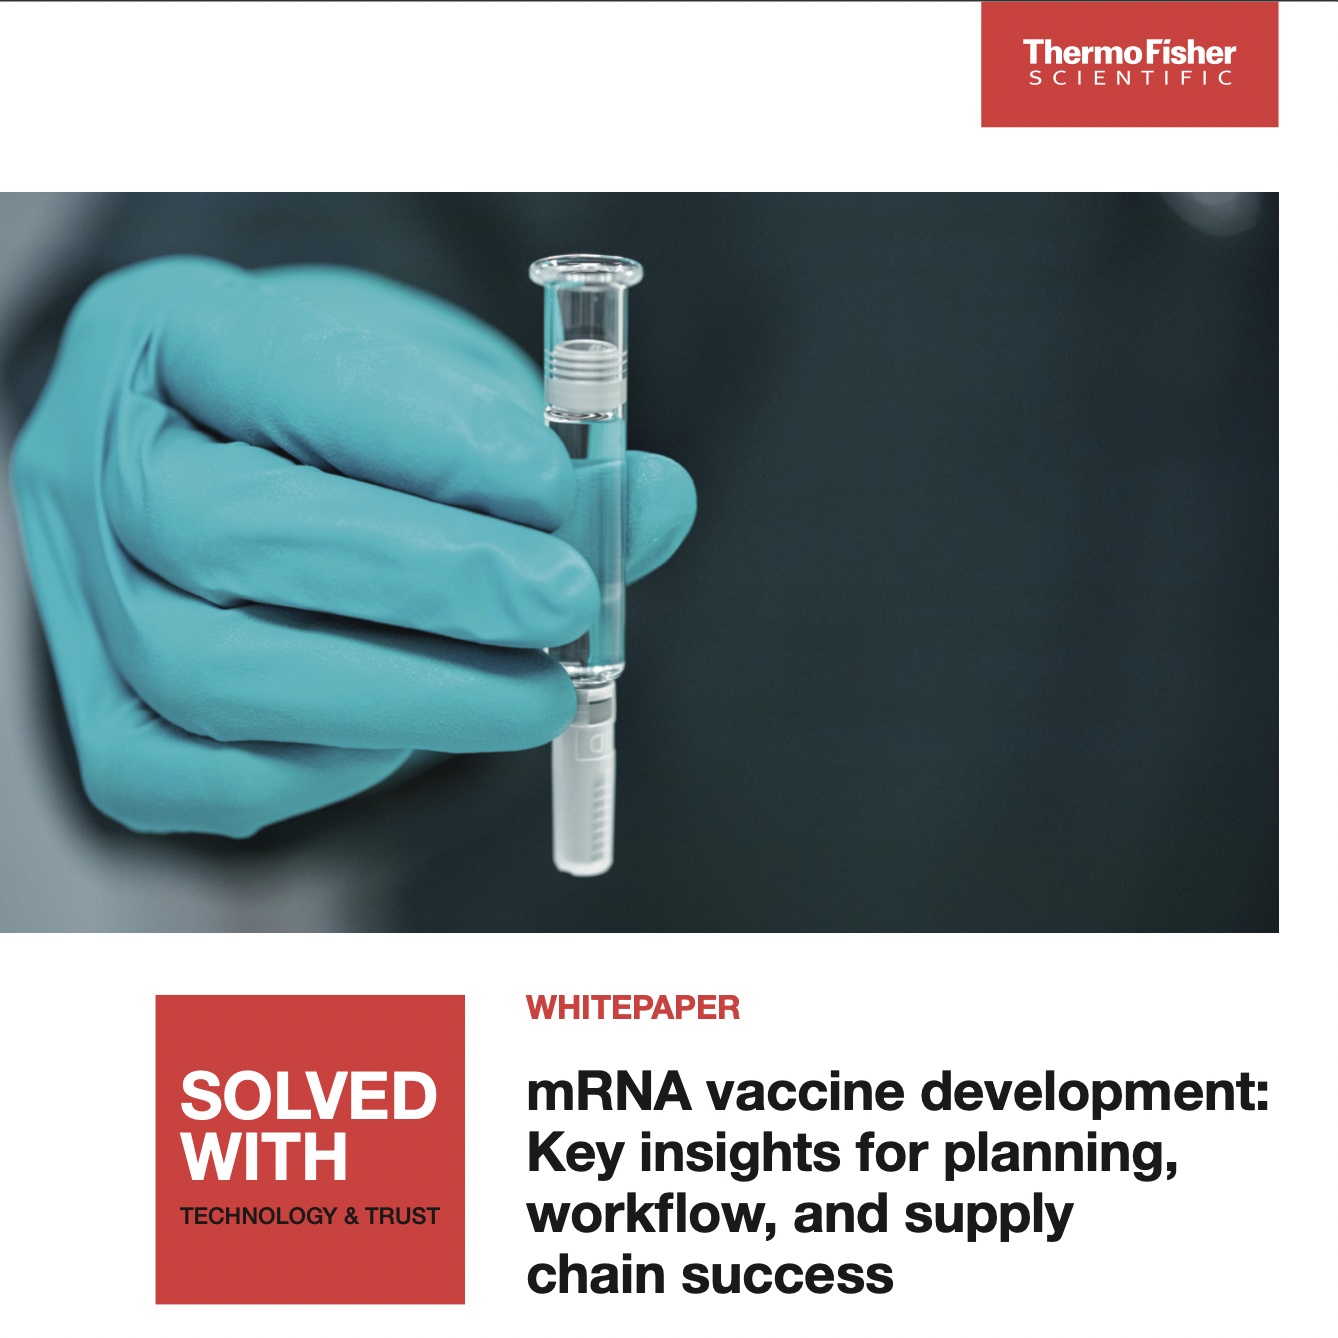 mRNA vaccine development: Key insights for planning, workflow, and supply chain success